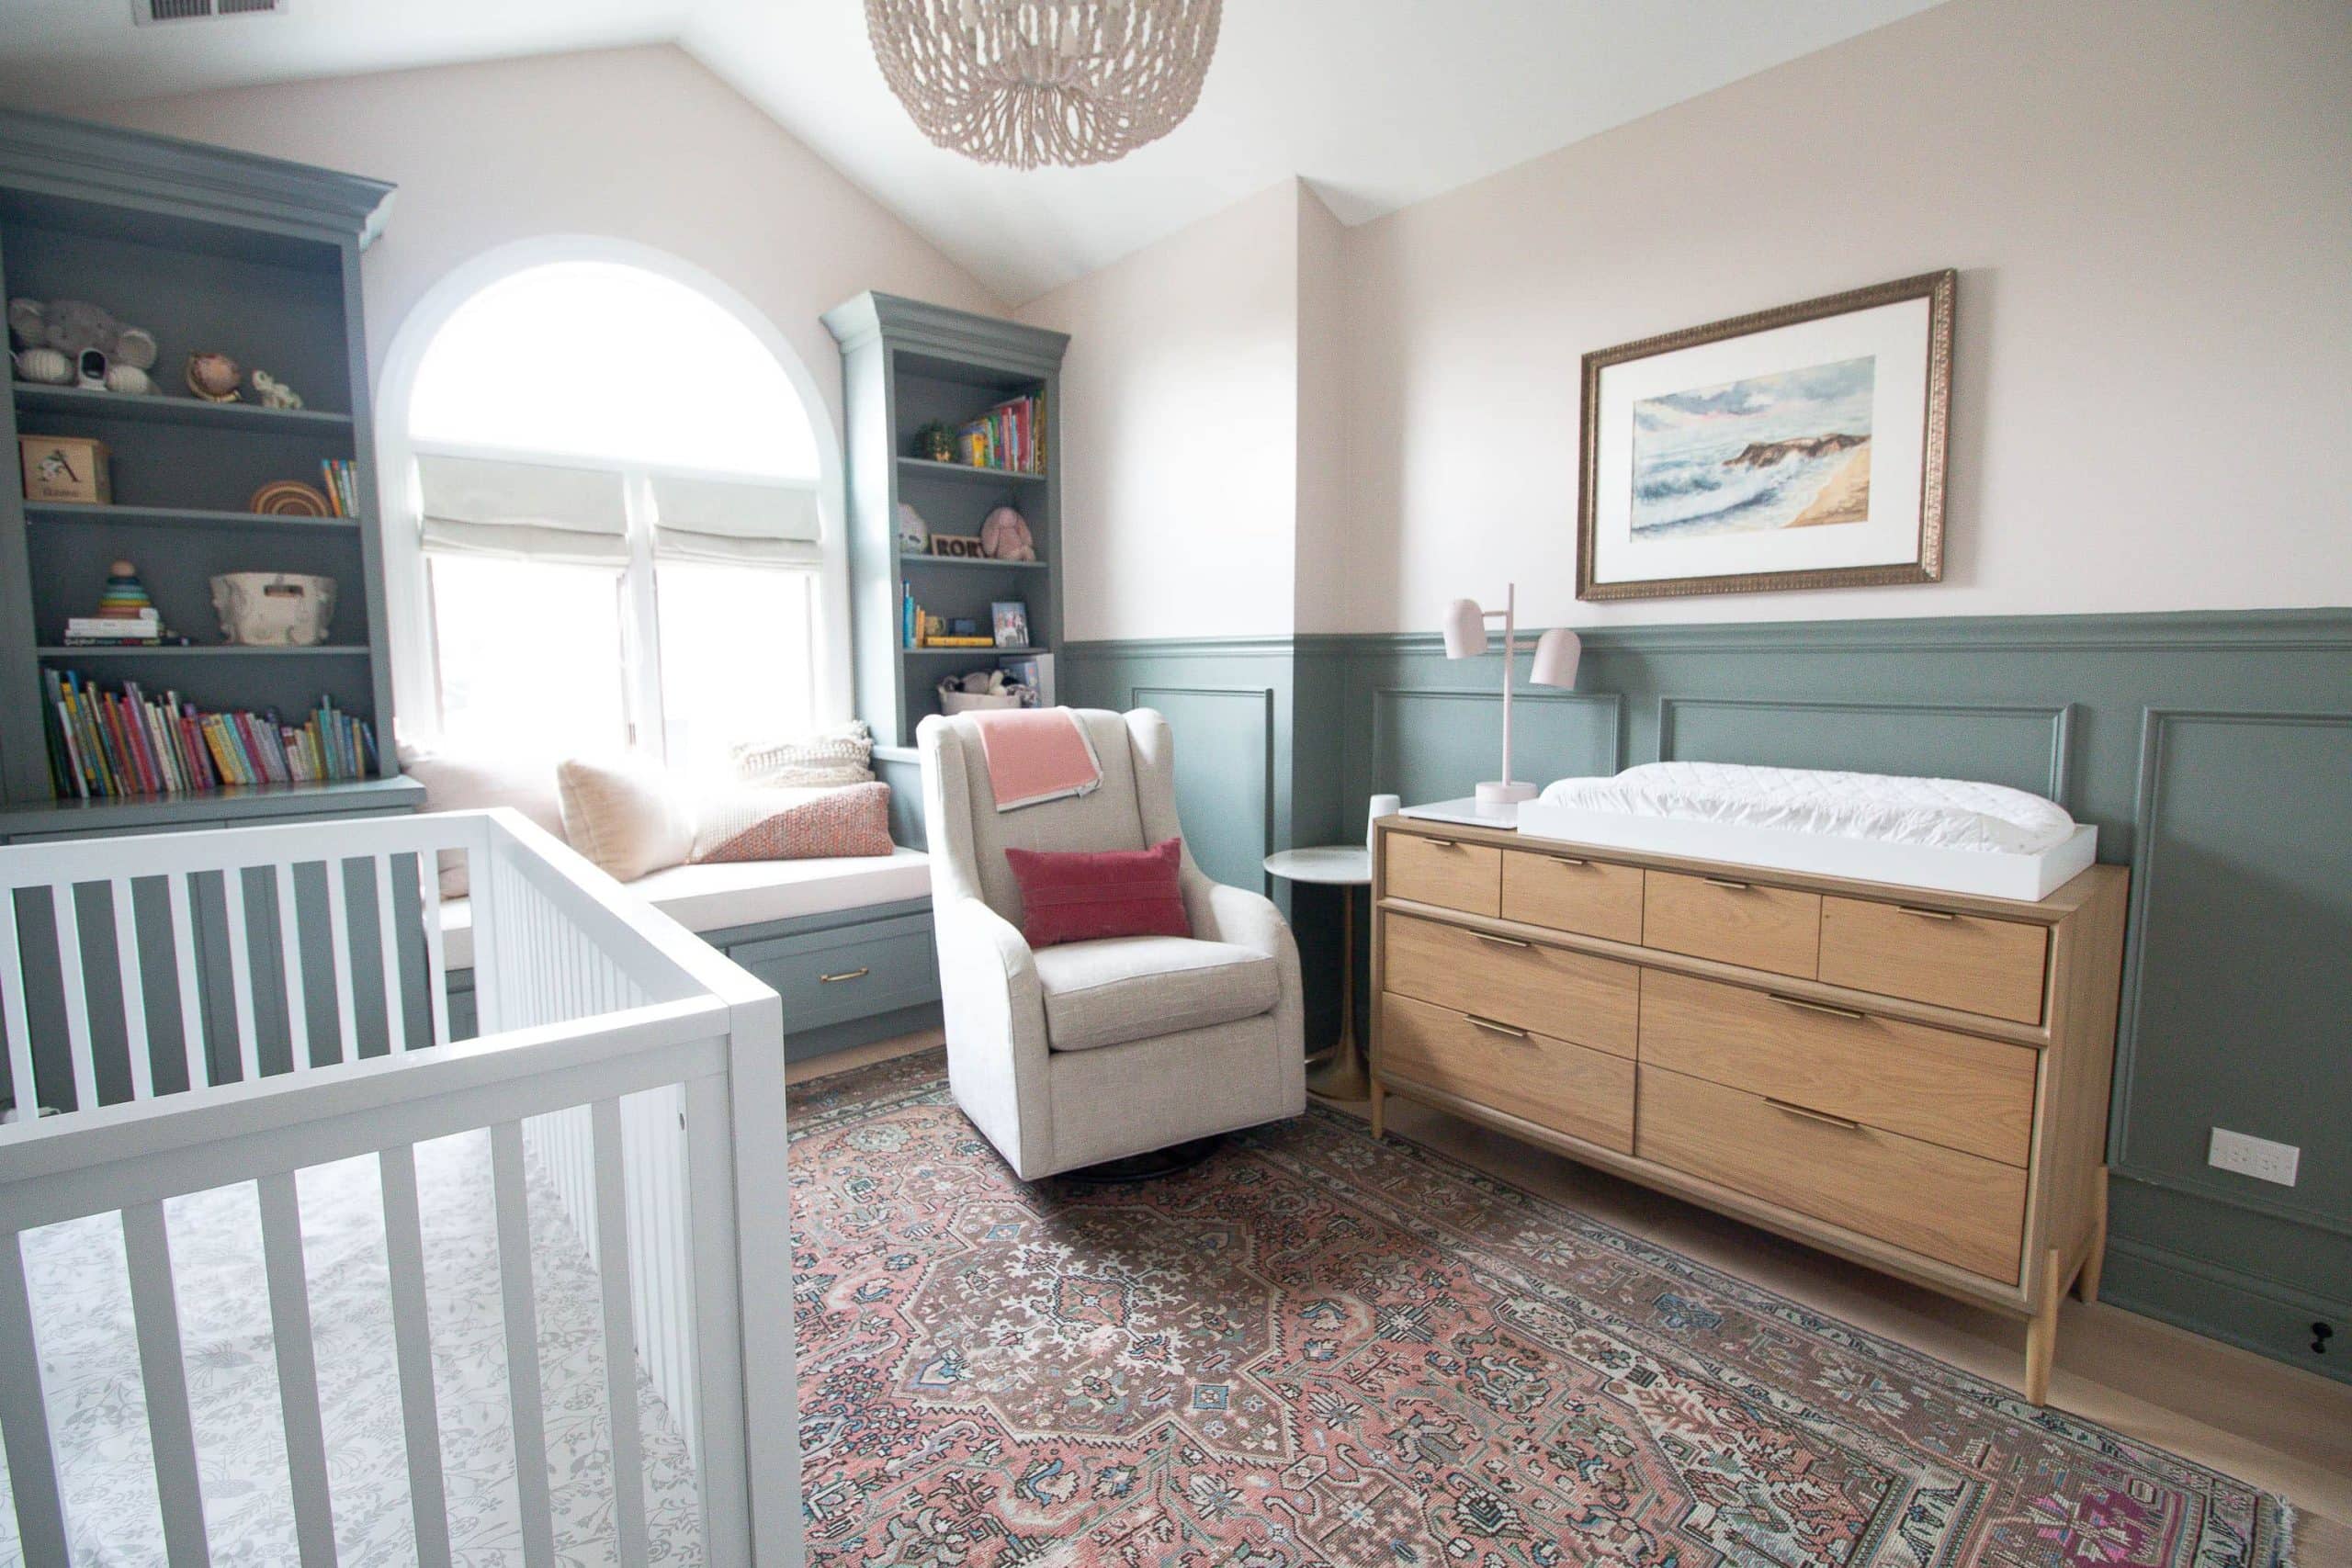 Rory's nursery with sage green and blush accents